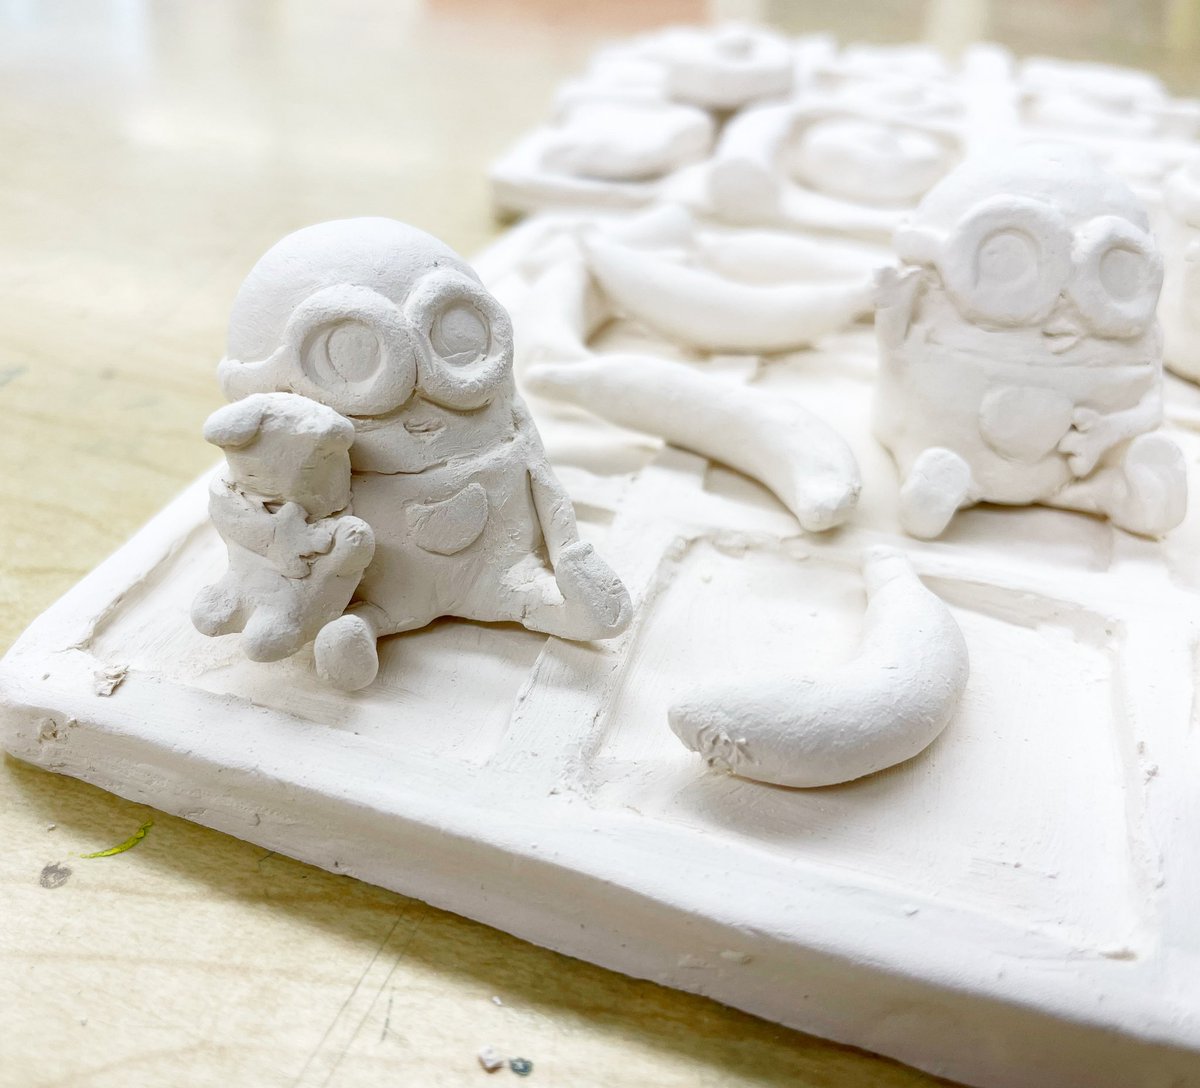 7th grade ceramic Tic Tac Toe Boards are coming out of the kiln and ready to be painted! I had to share a detail of this amazing set - Sanmayi sculpted minions vs bananas, and they are so intricate! 

#arted #arteducation #artsed #middleschoolart #REfreshREconnectREimagineXRDS